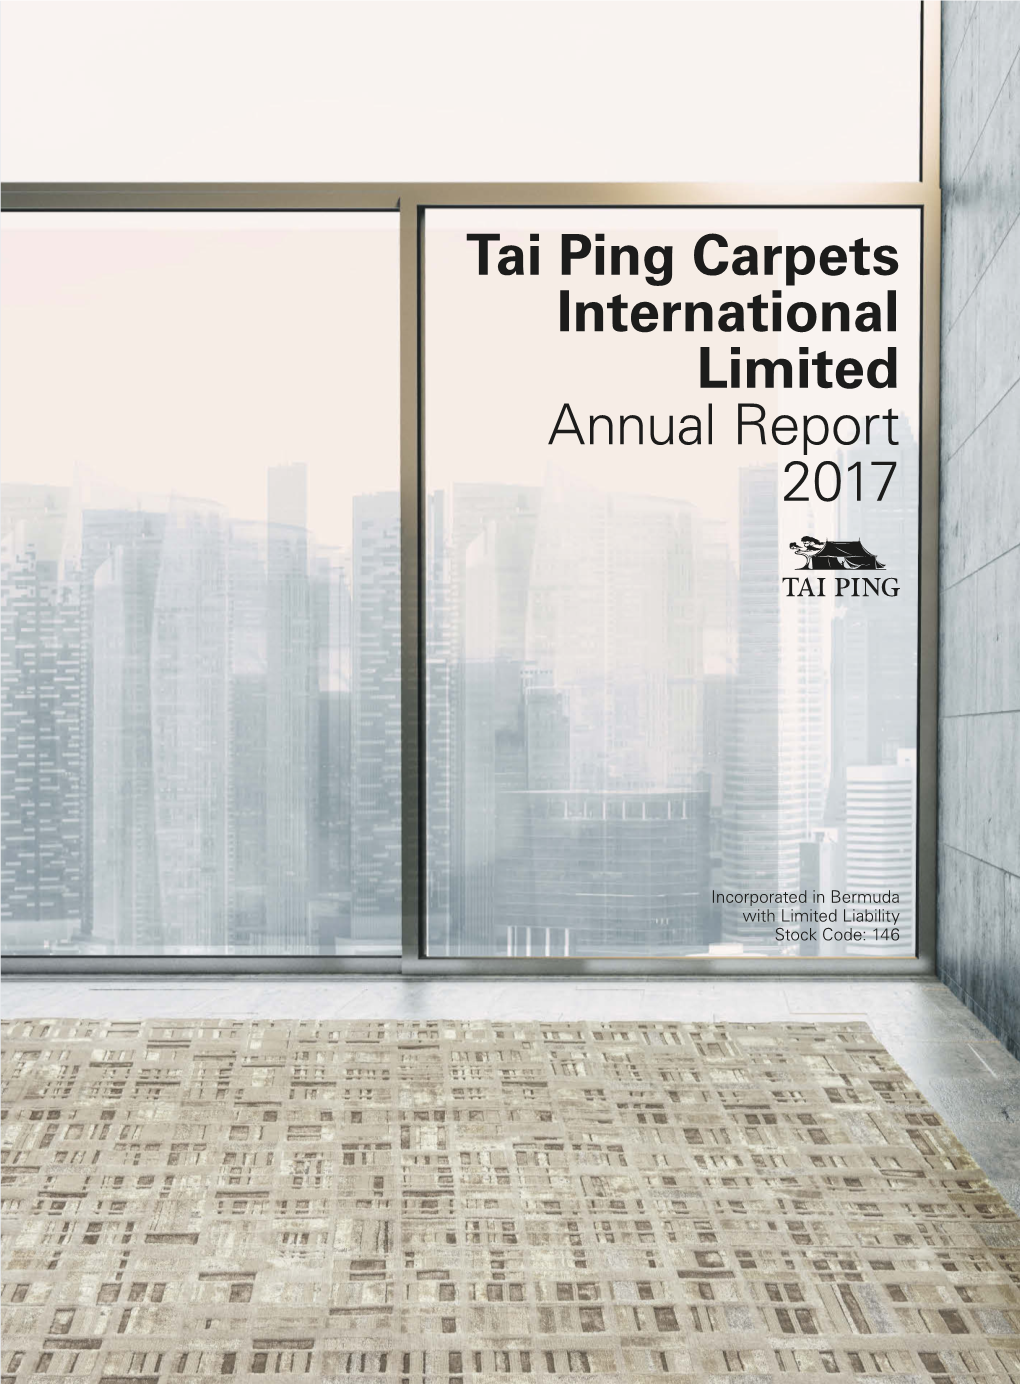 Tai Ping Carpets International Limited Annual Report 2017